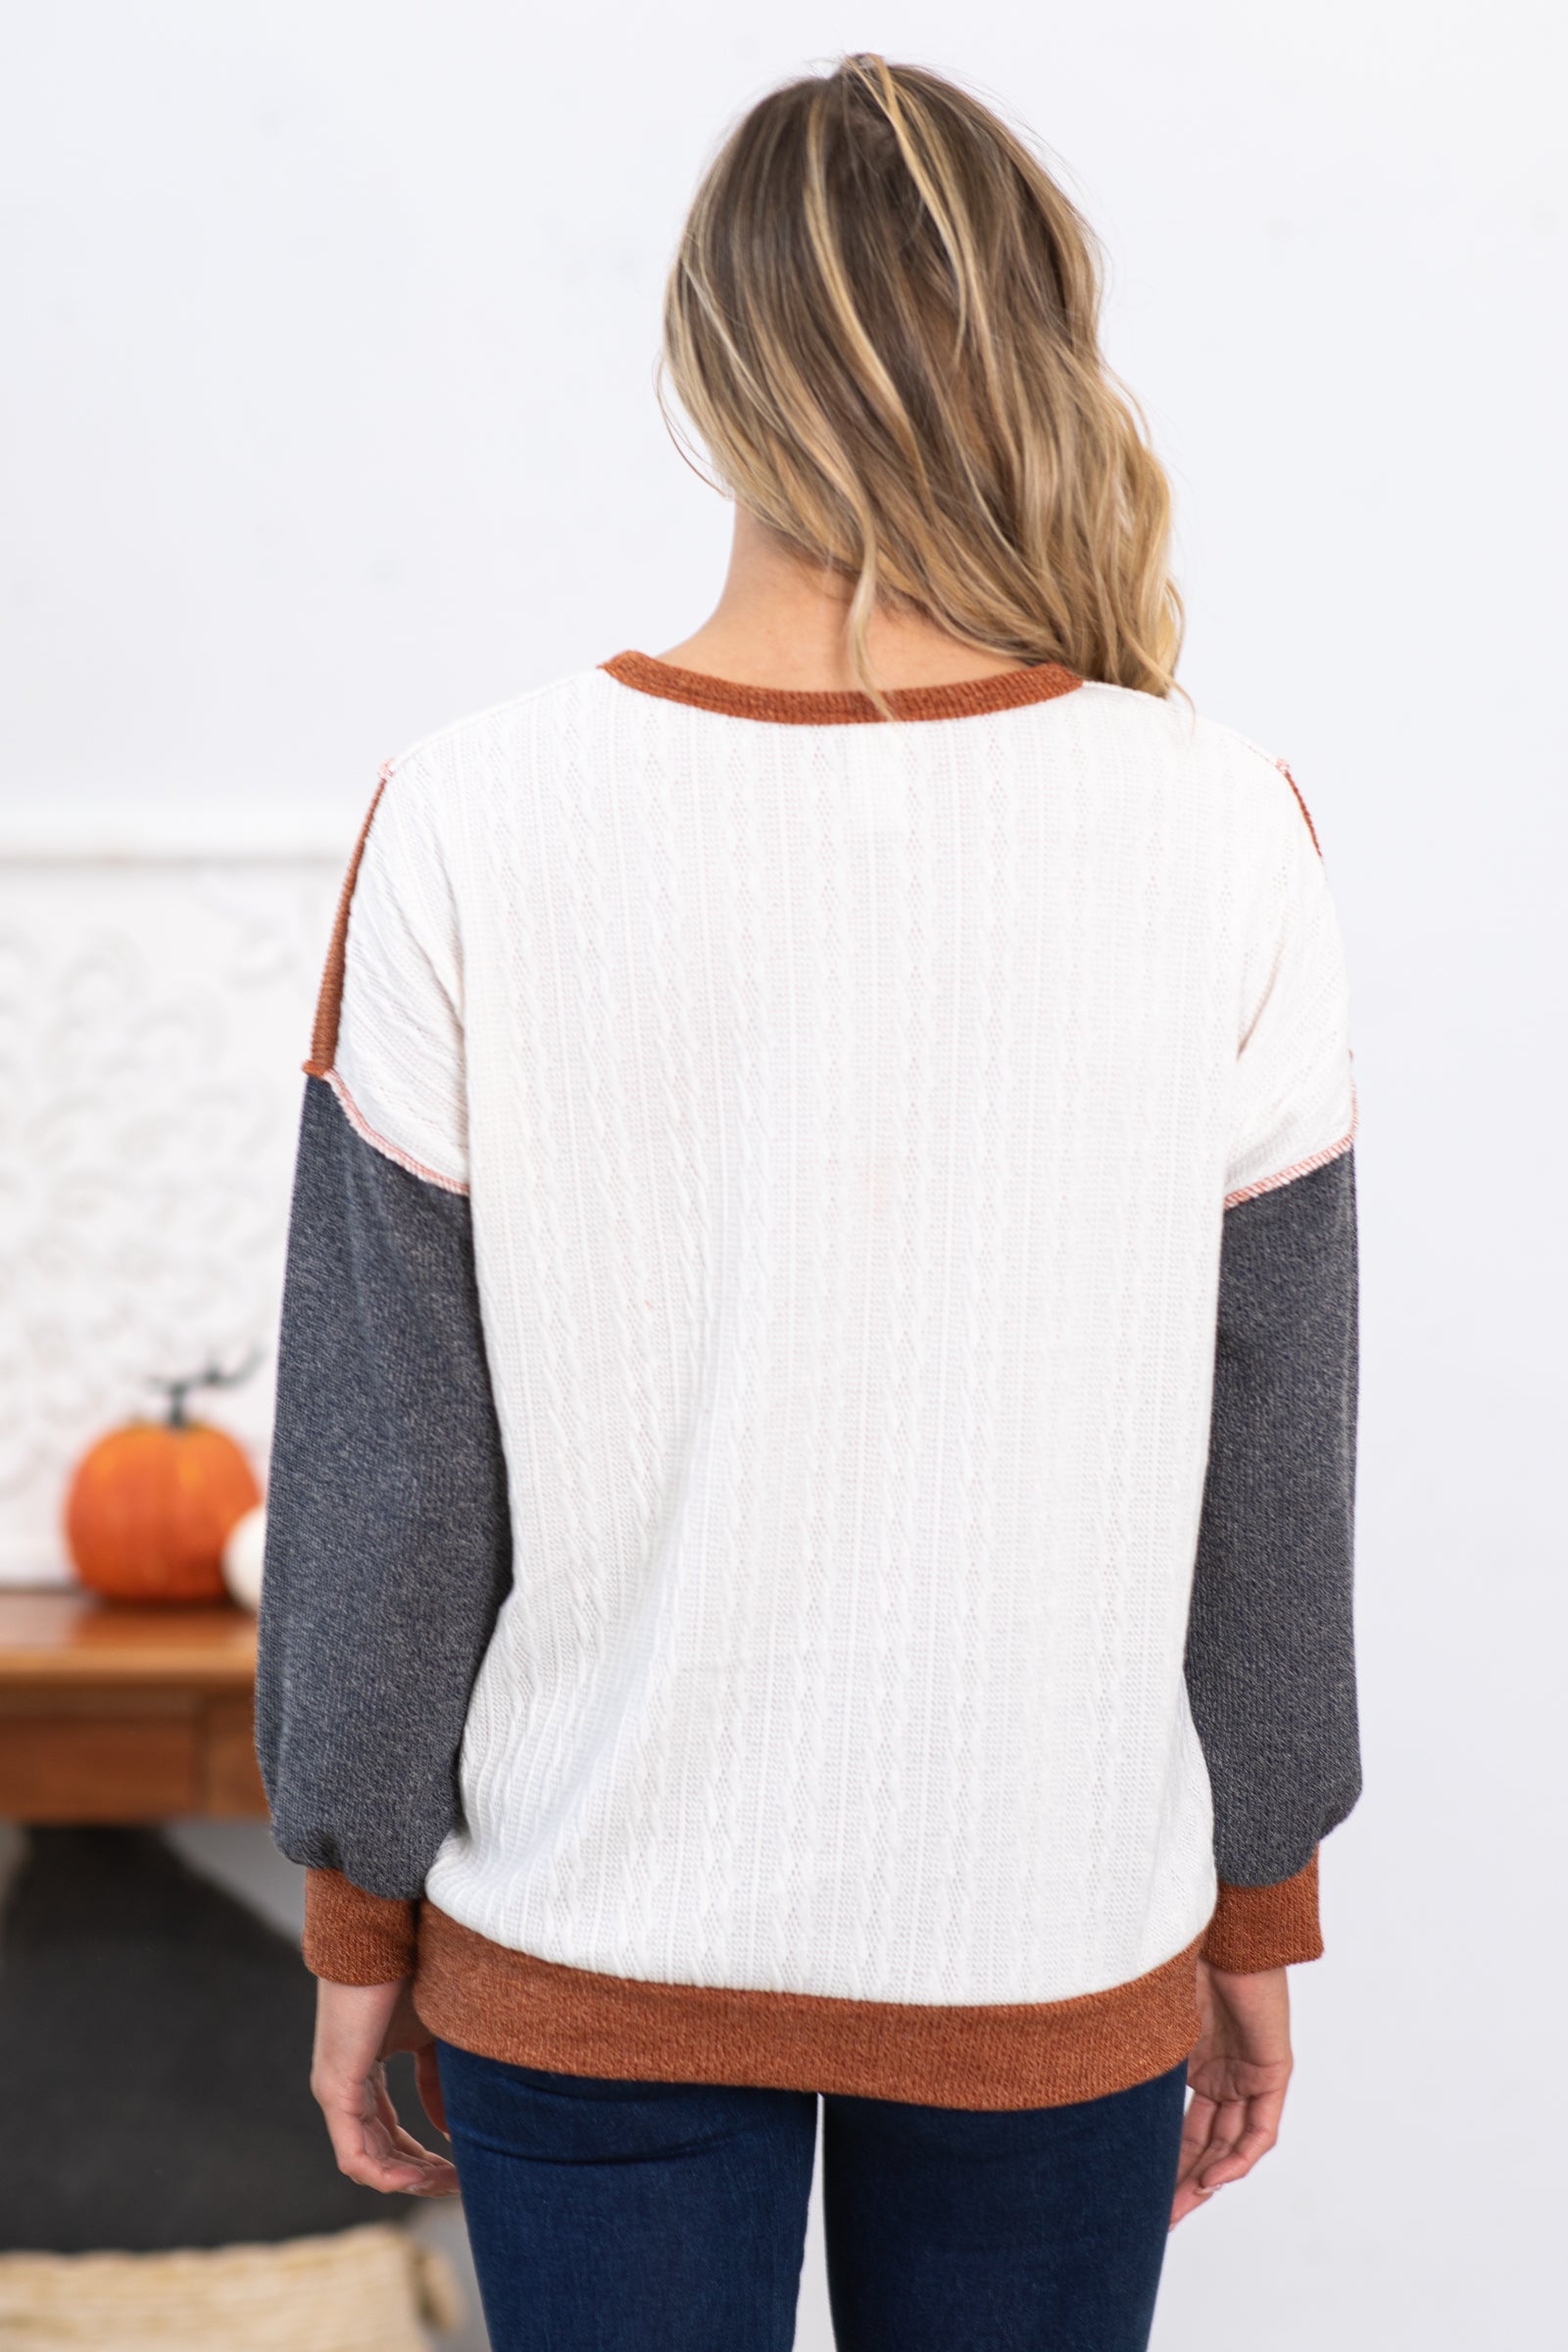 Rust and Charcoal Colorblock Top With Pocket